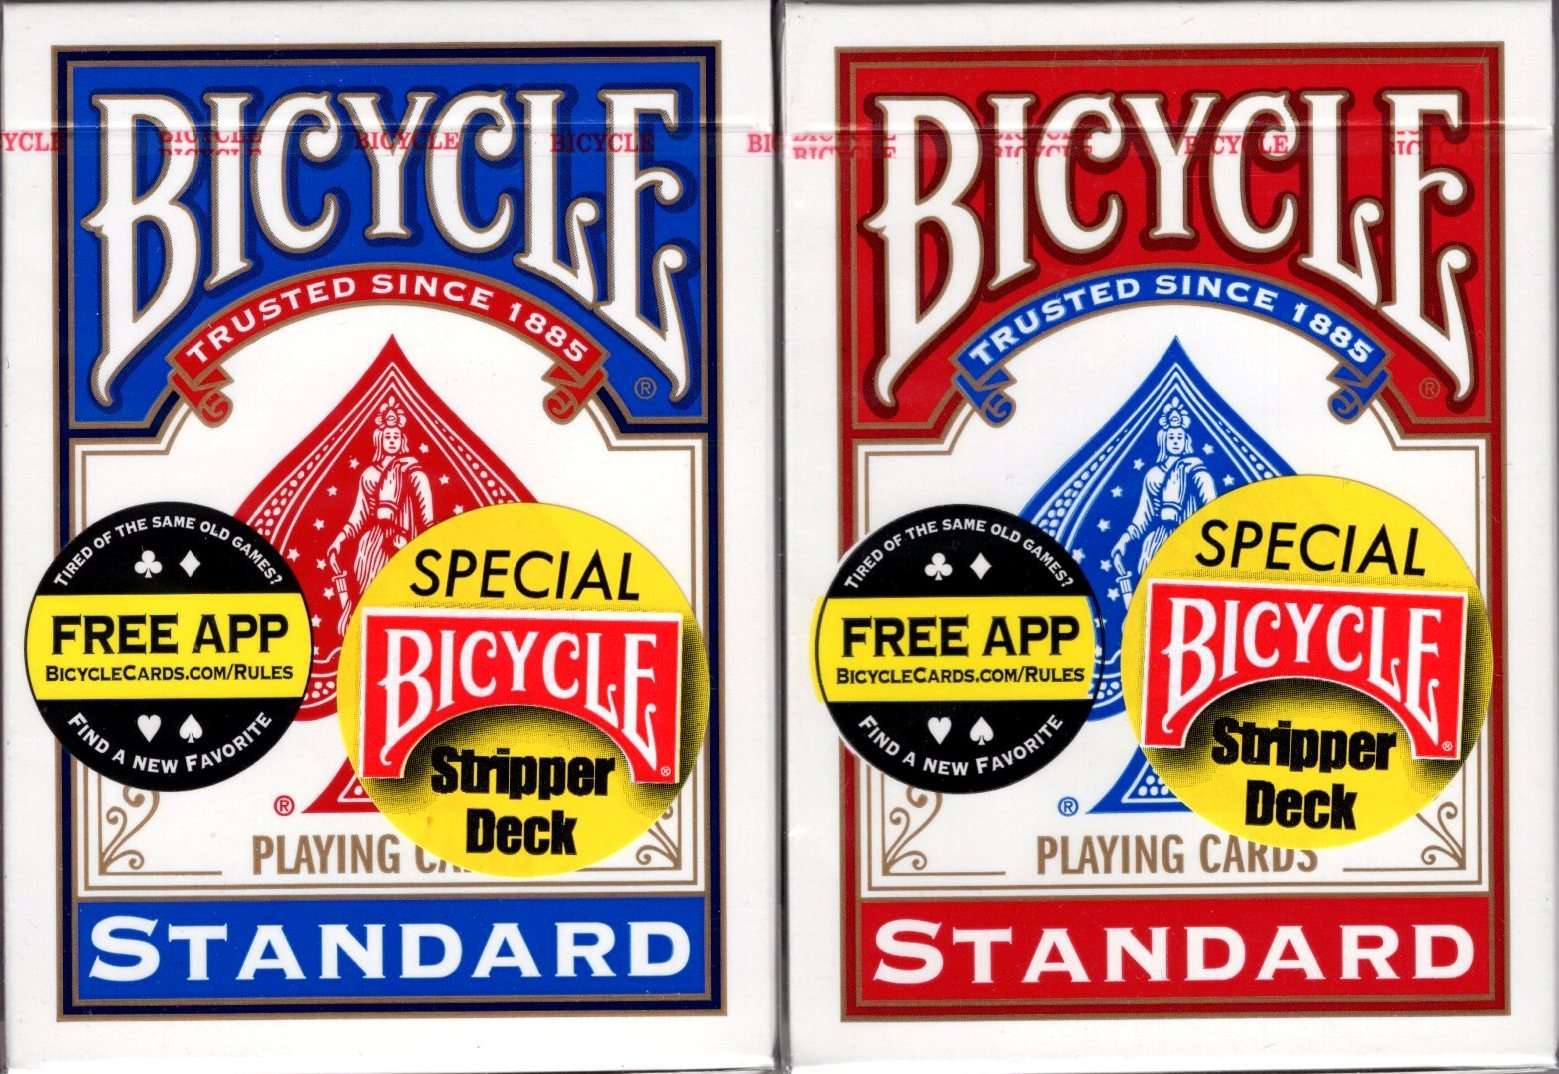 PlayingCardDecks.com-Bicycle Stripper Deck Playing Cards